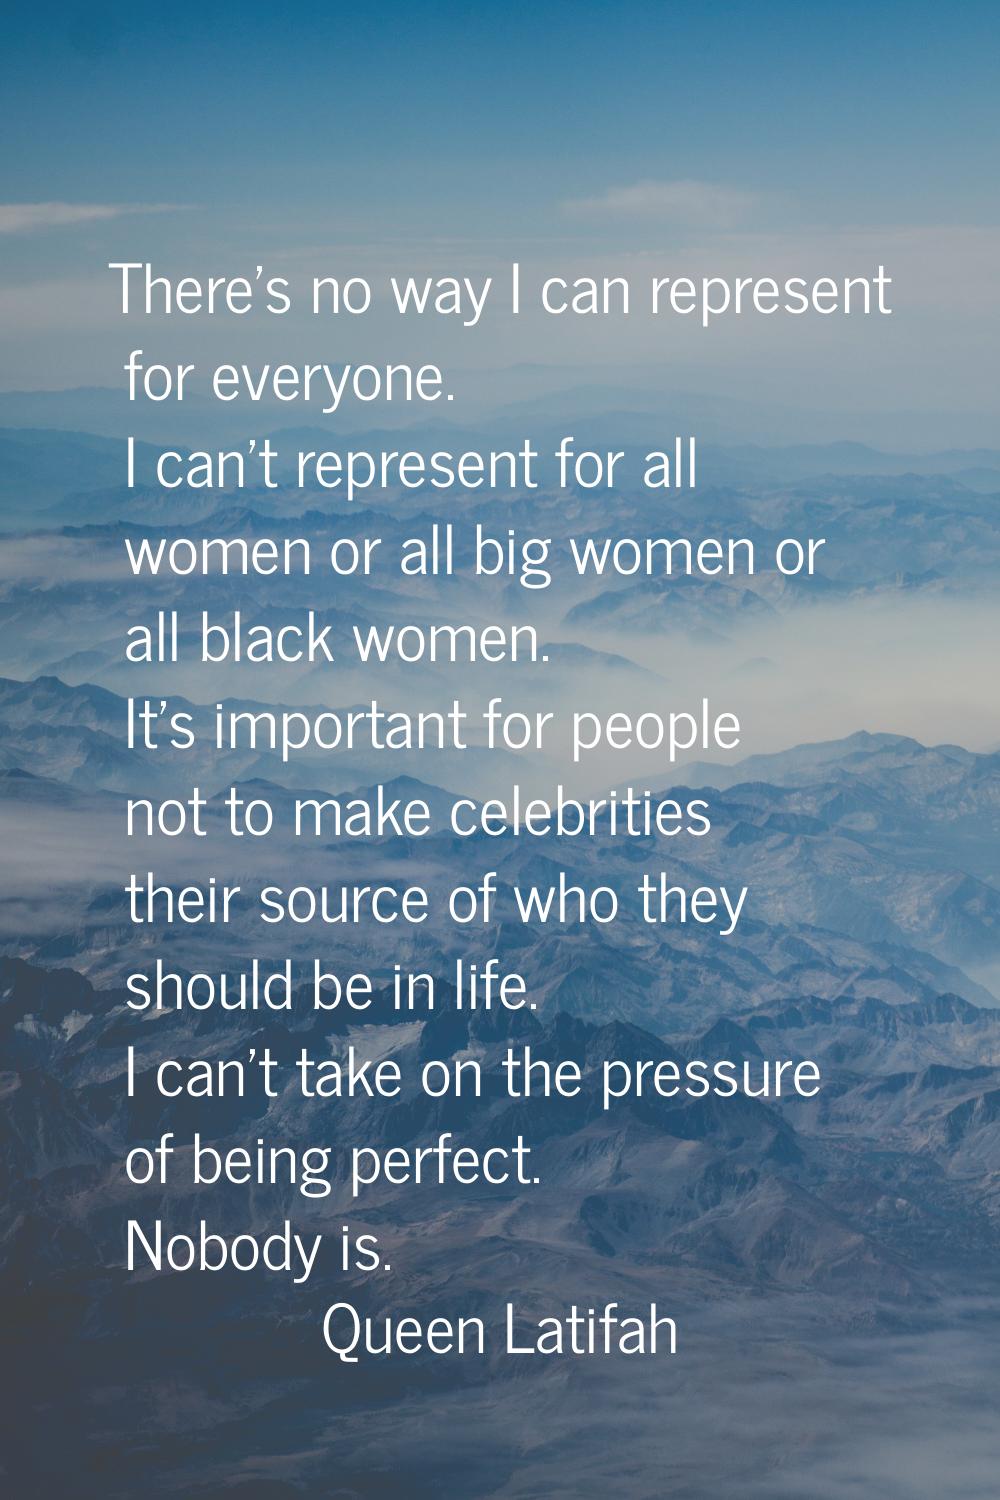 There's no way I can represent for everyone. I can't represent for all women or all big women or al